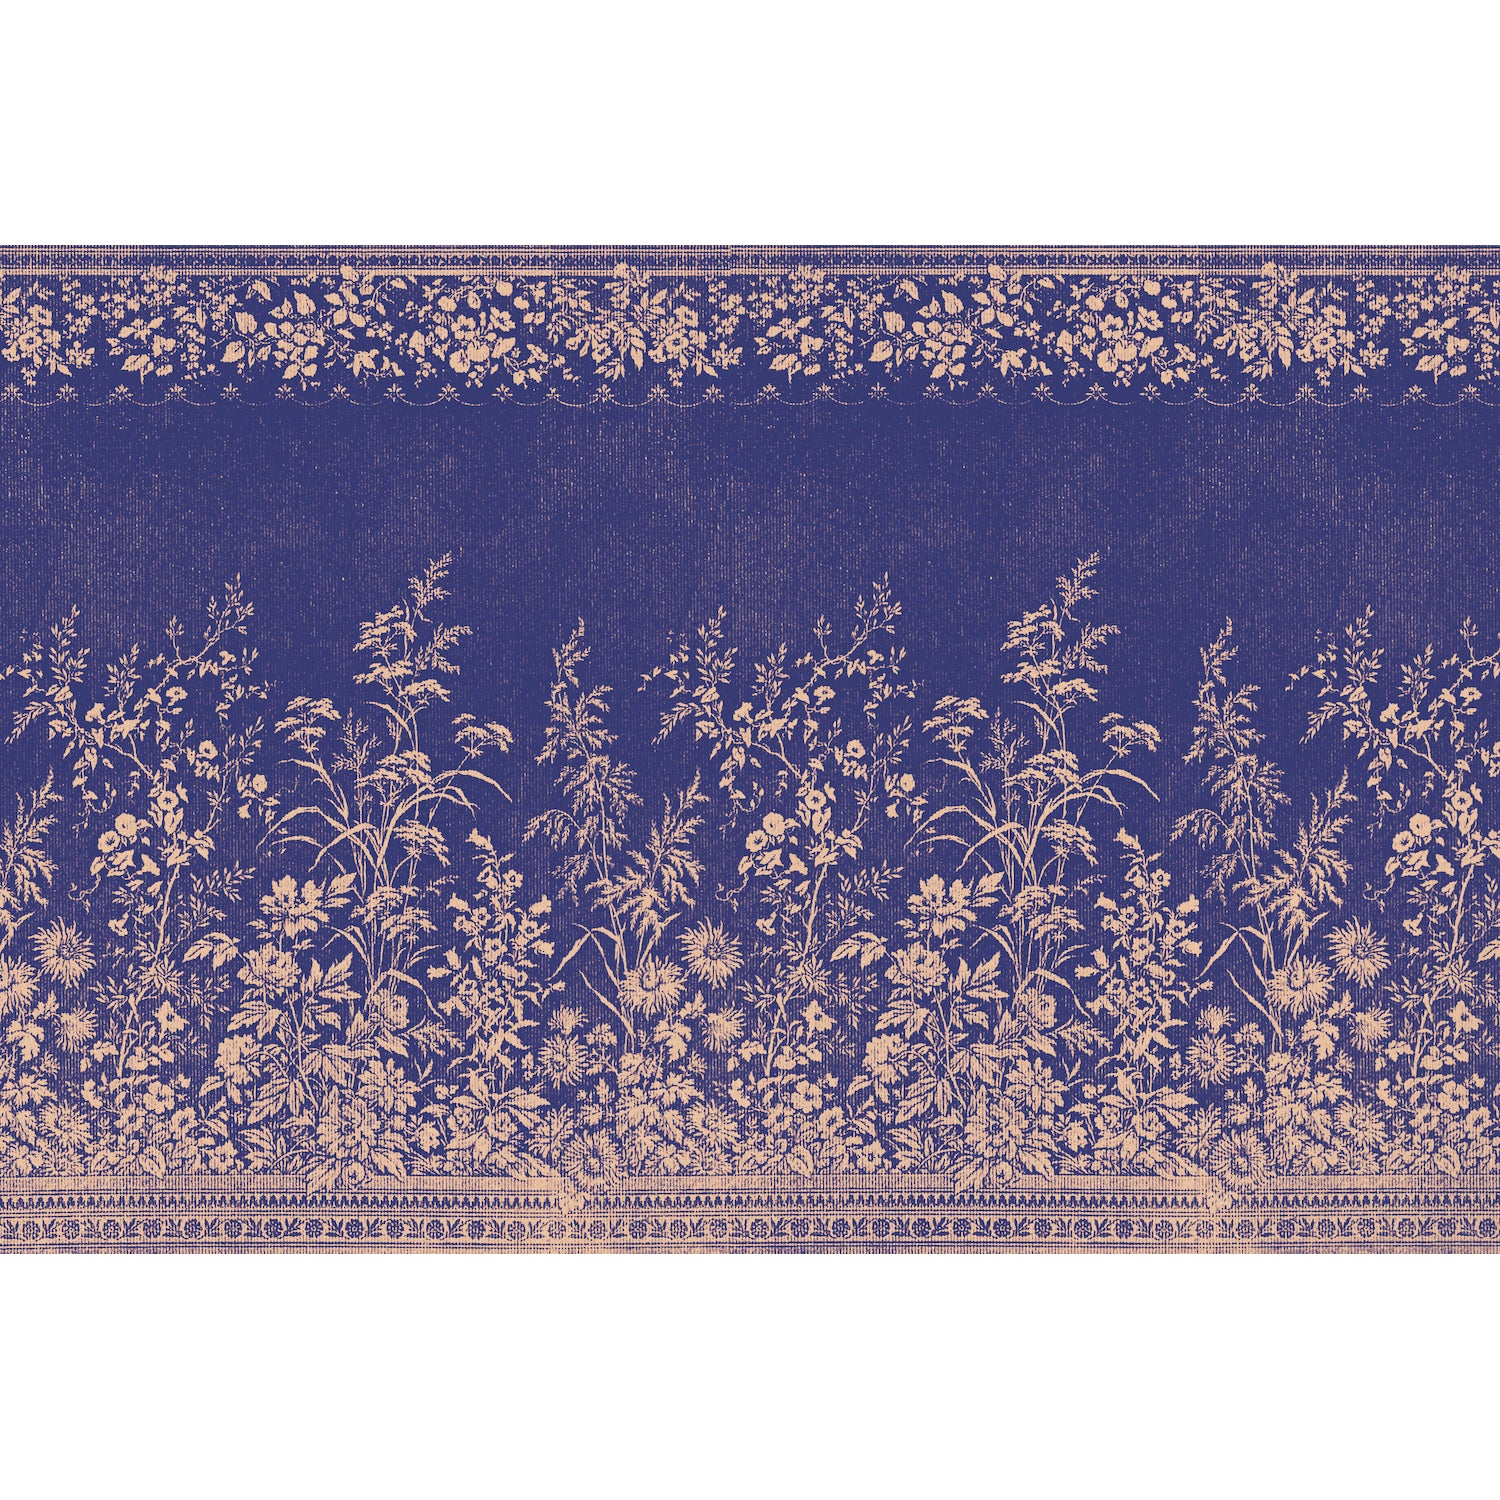 A Navy Woven Floral Placemat from Hester &amp; Cook with a blue and gold floral pattern on a fabric-inspired print tablecloth.